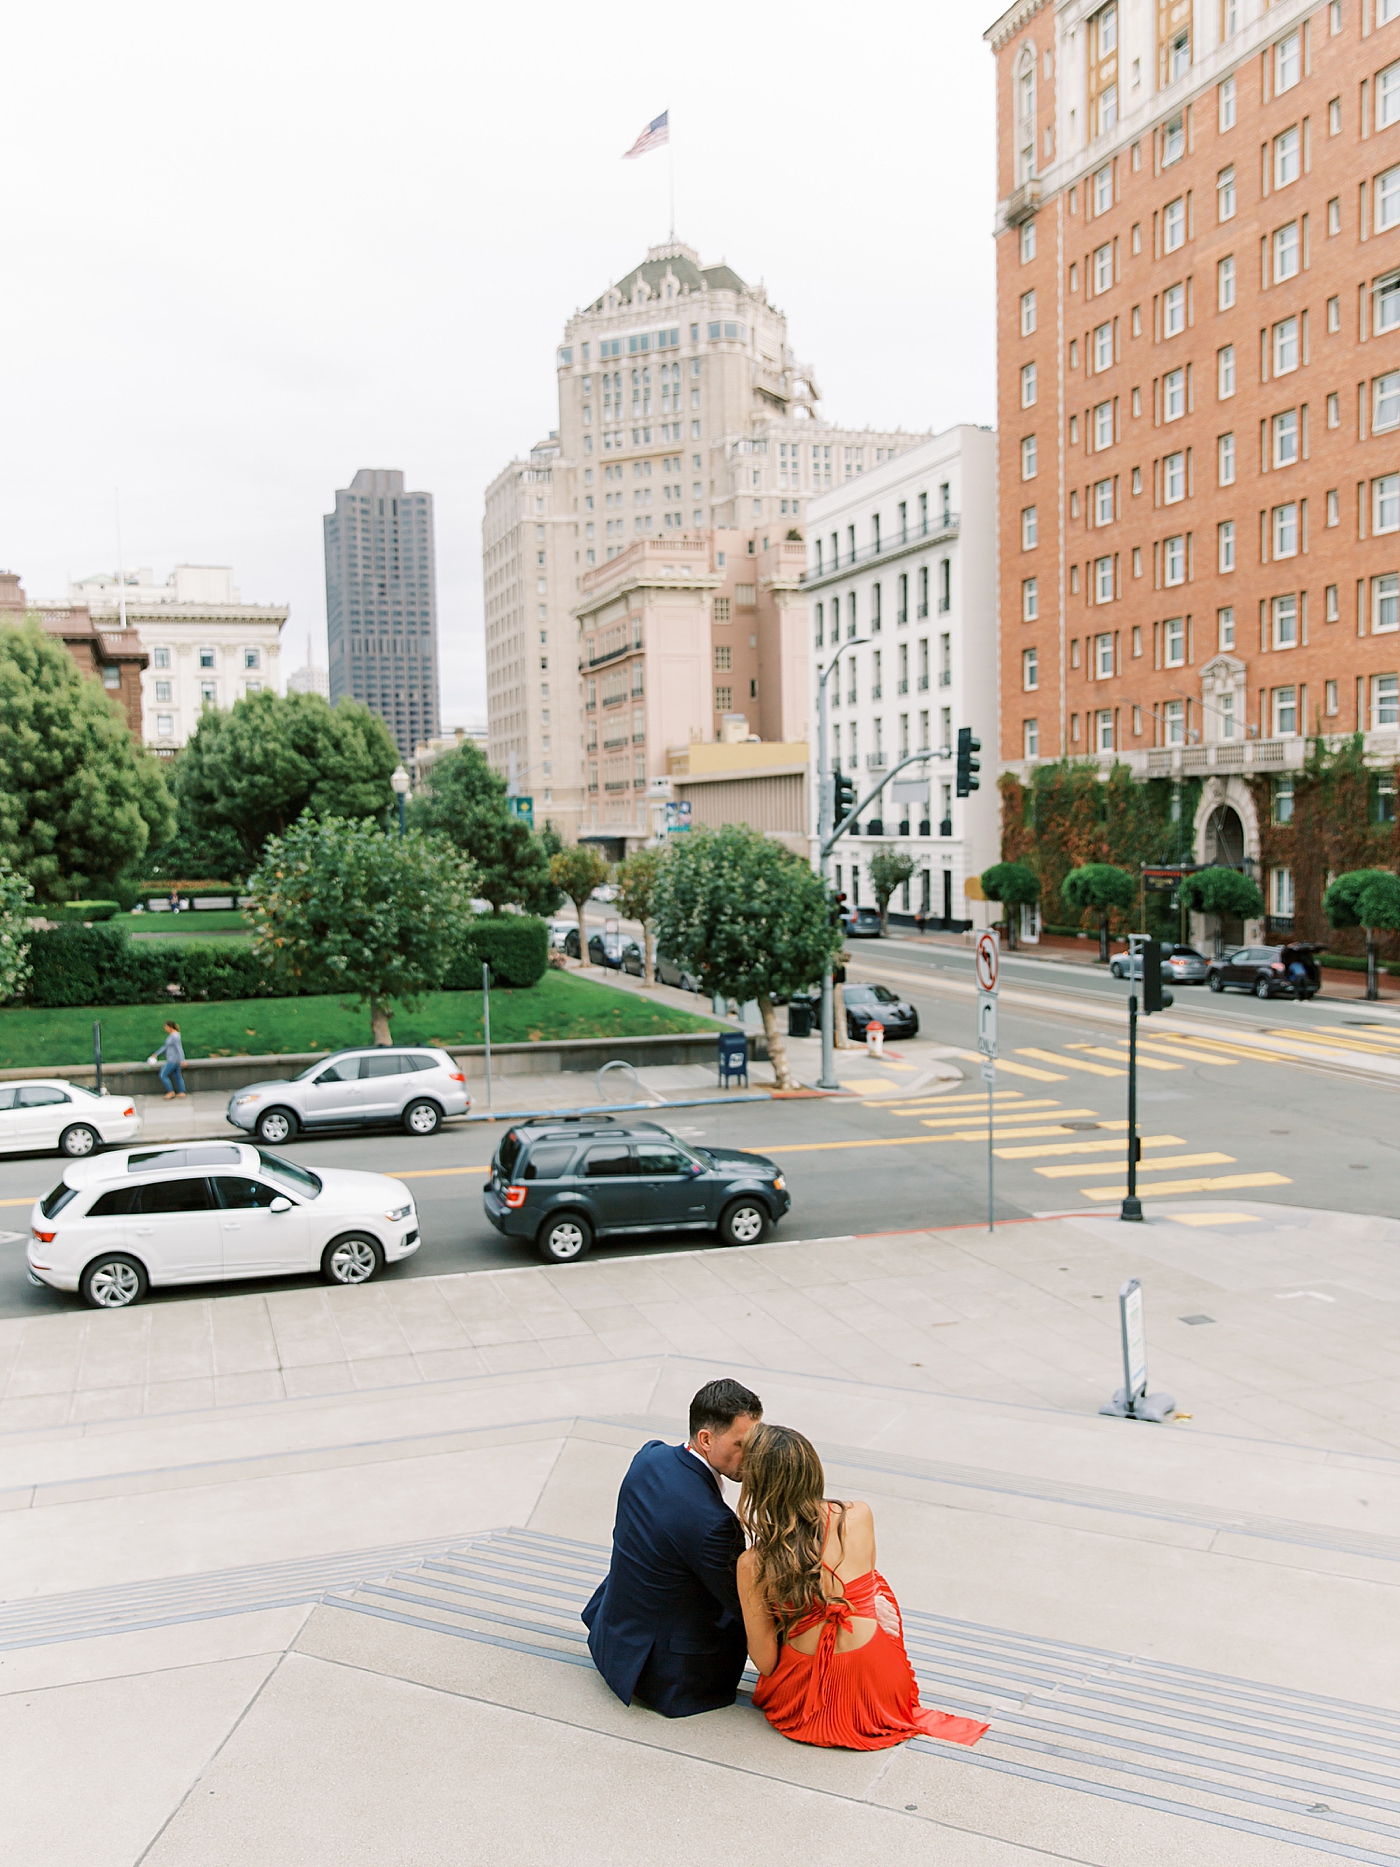 Couple in red and black sitting on the steps of the Fairmont | Photo by Diane Sotero